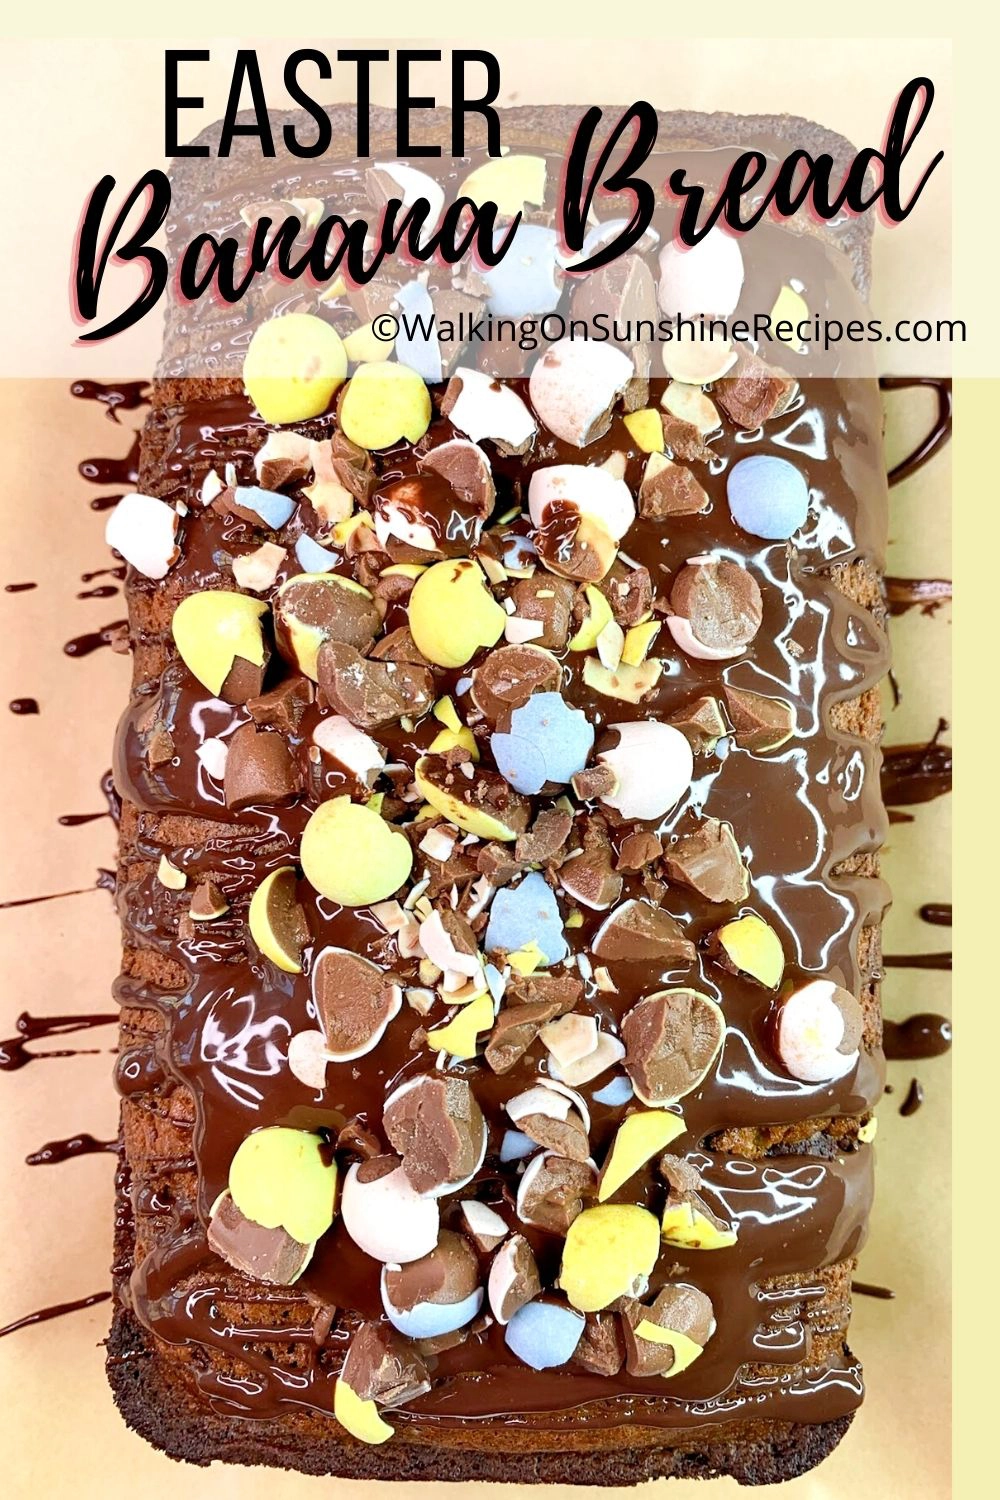 Easter banana bread with melted chocolate and chocolate candies. 